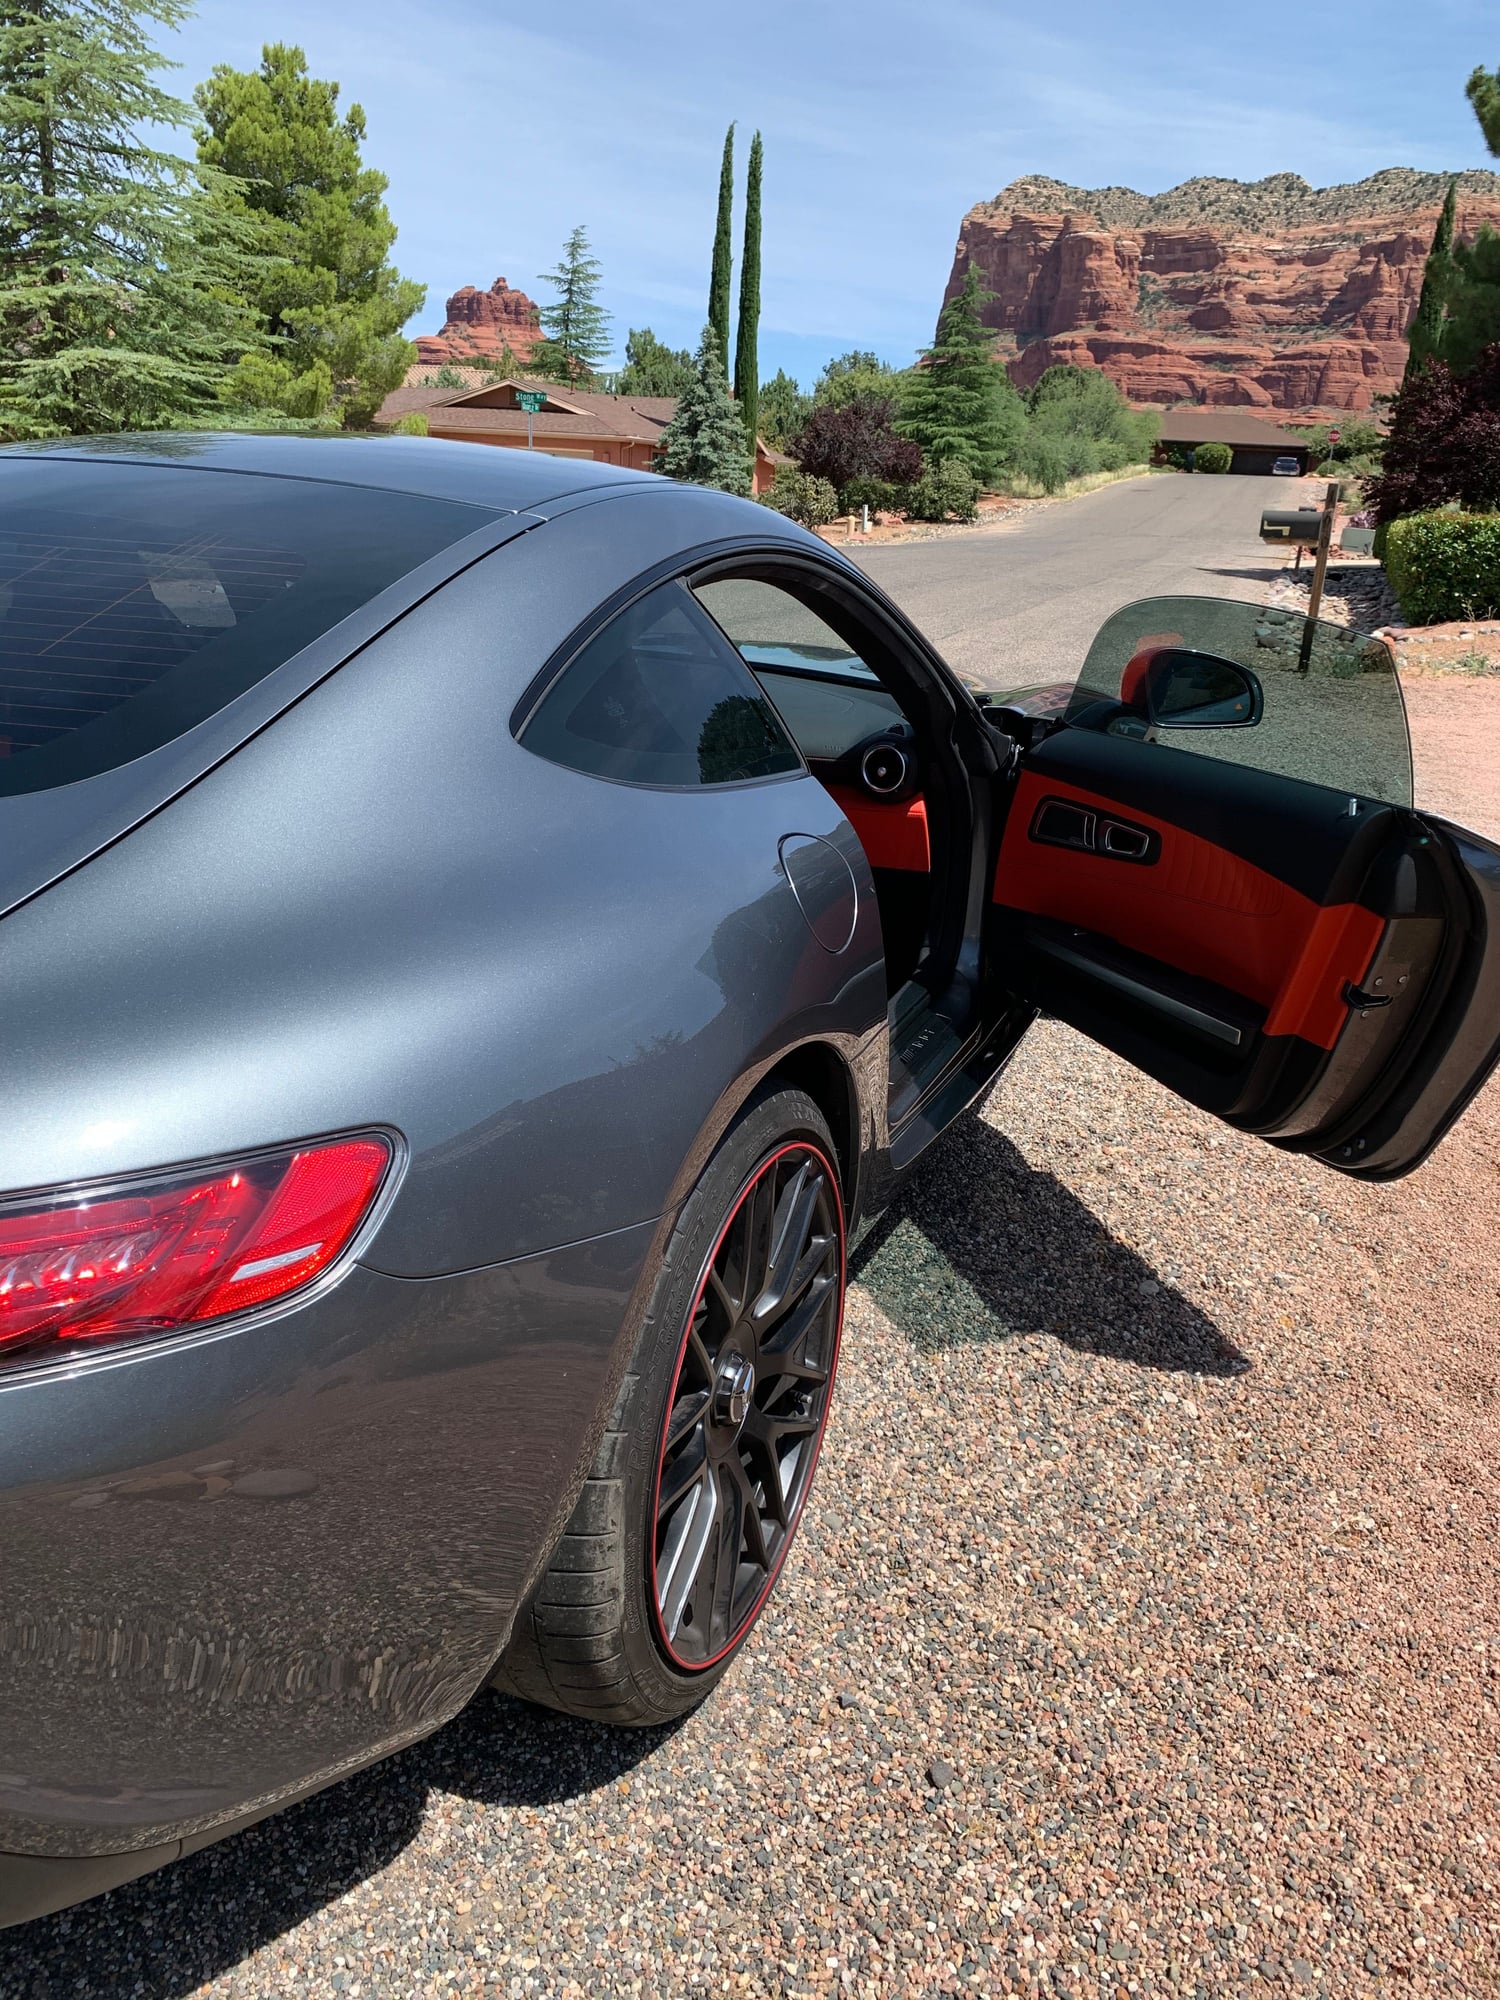 2016 Mercedes-Benz AMG GT S - Low mileage 2016 AMG GTS with Eurocharged stage 1 tune for Sale - Used - VIN WDDYJ7JA9GA008480 - 16,075 Miles - 8 cyl - 2WD - Automatic - Coupe - Gray - Phoenix, AZ 85018, United States